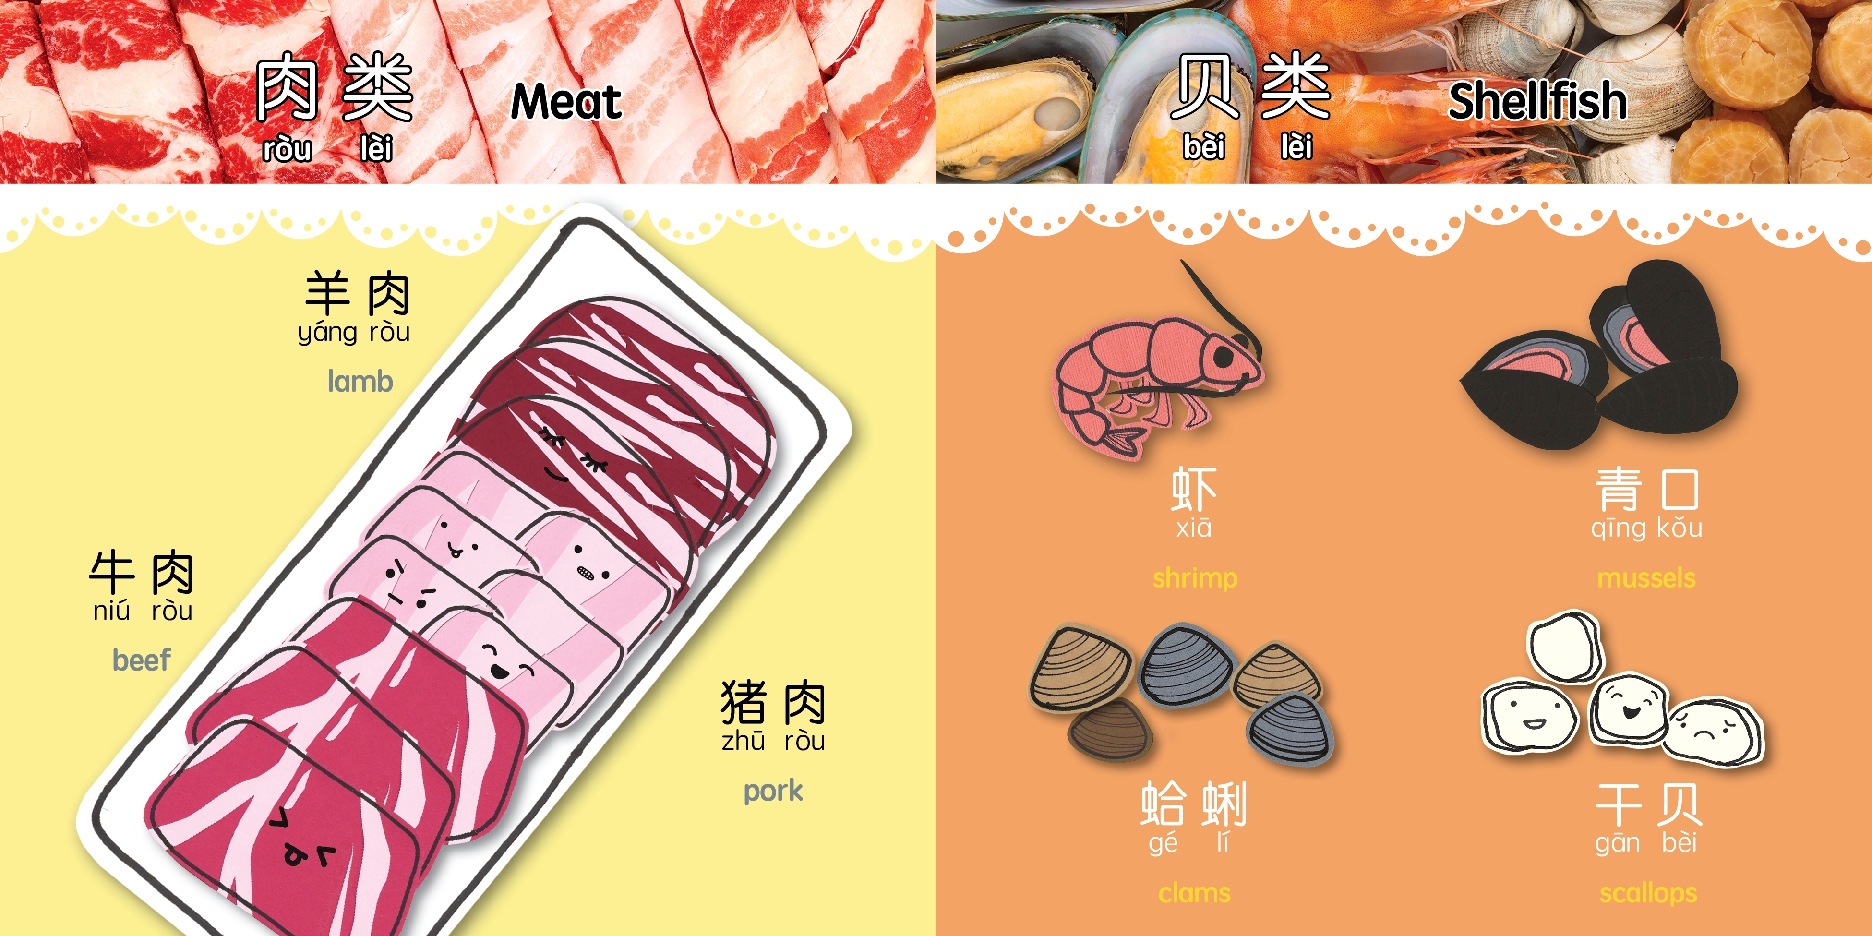 It's Time for Hot Pot - Simplified